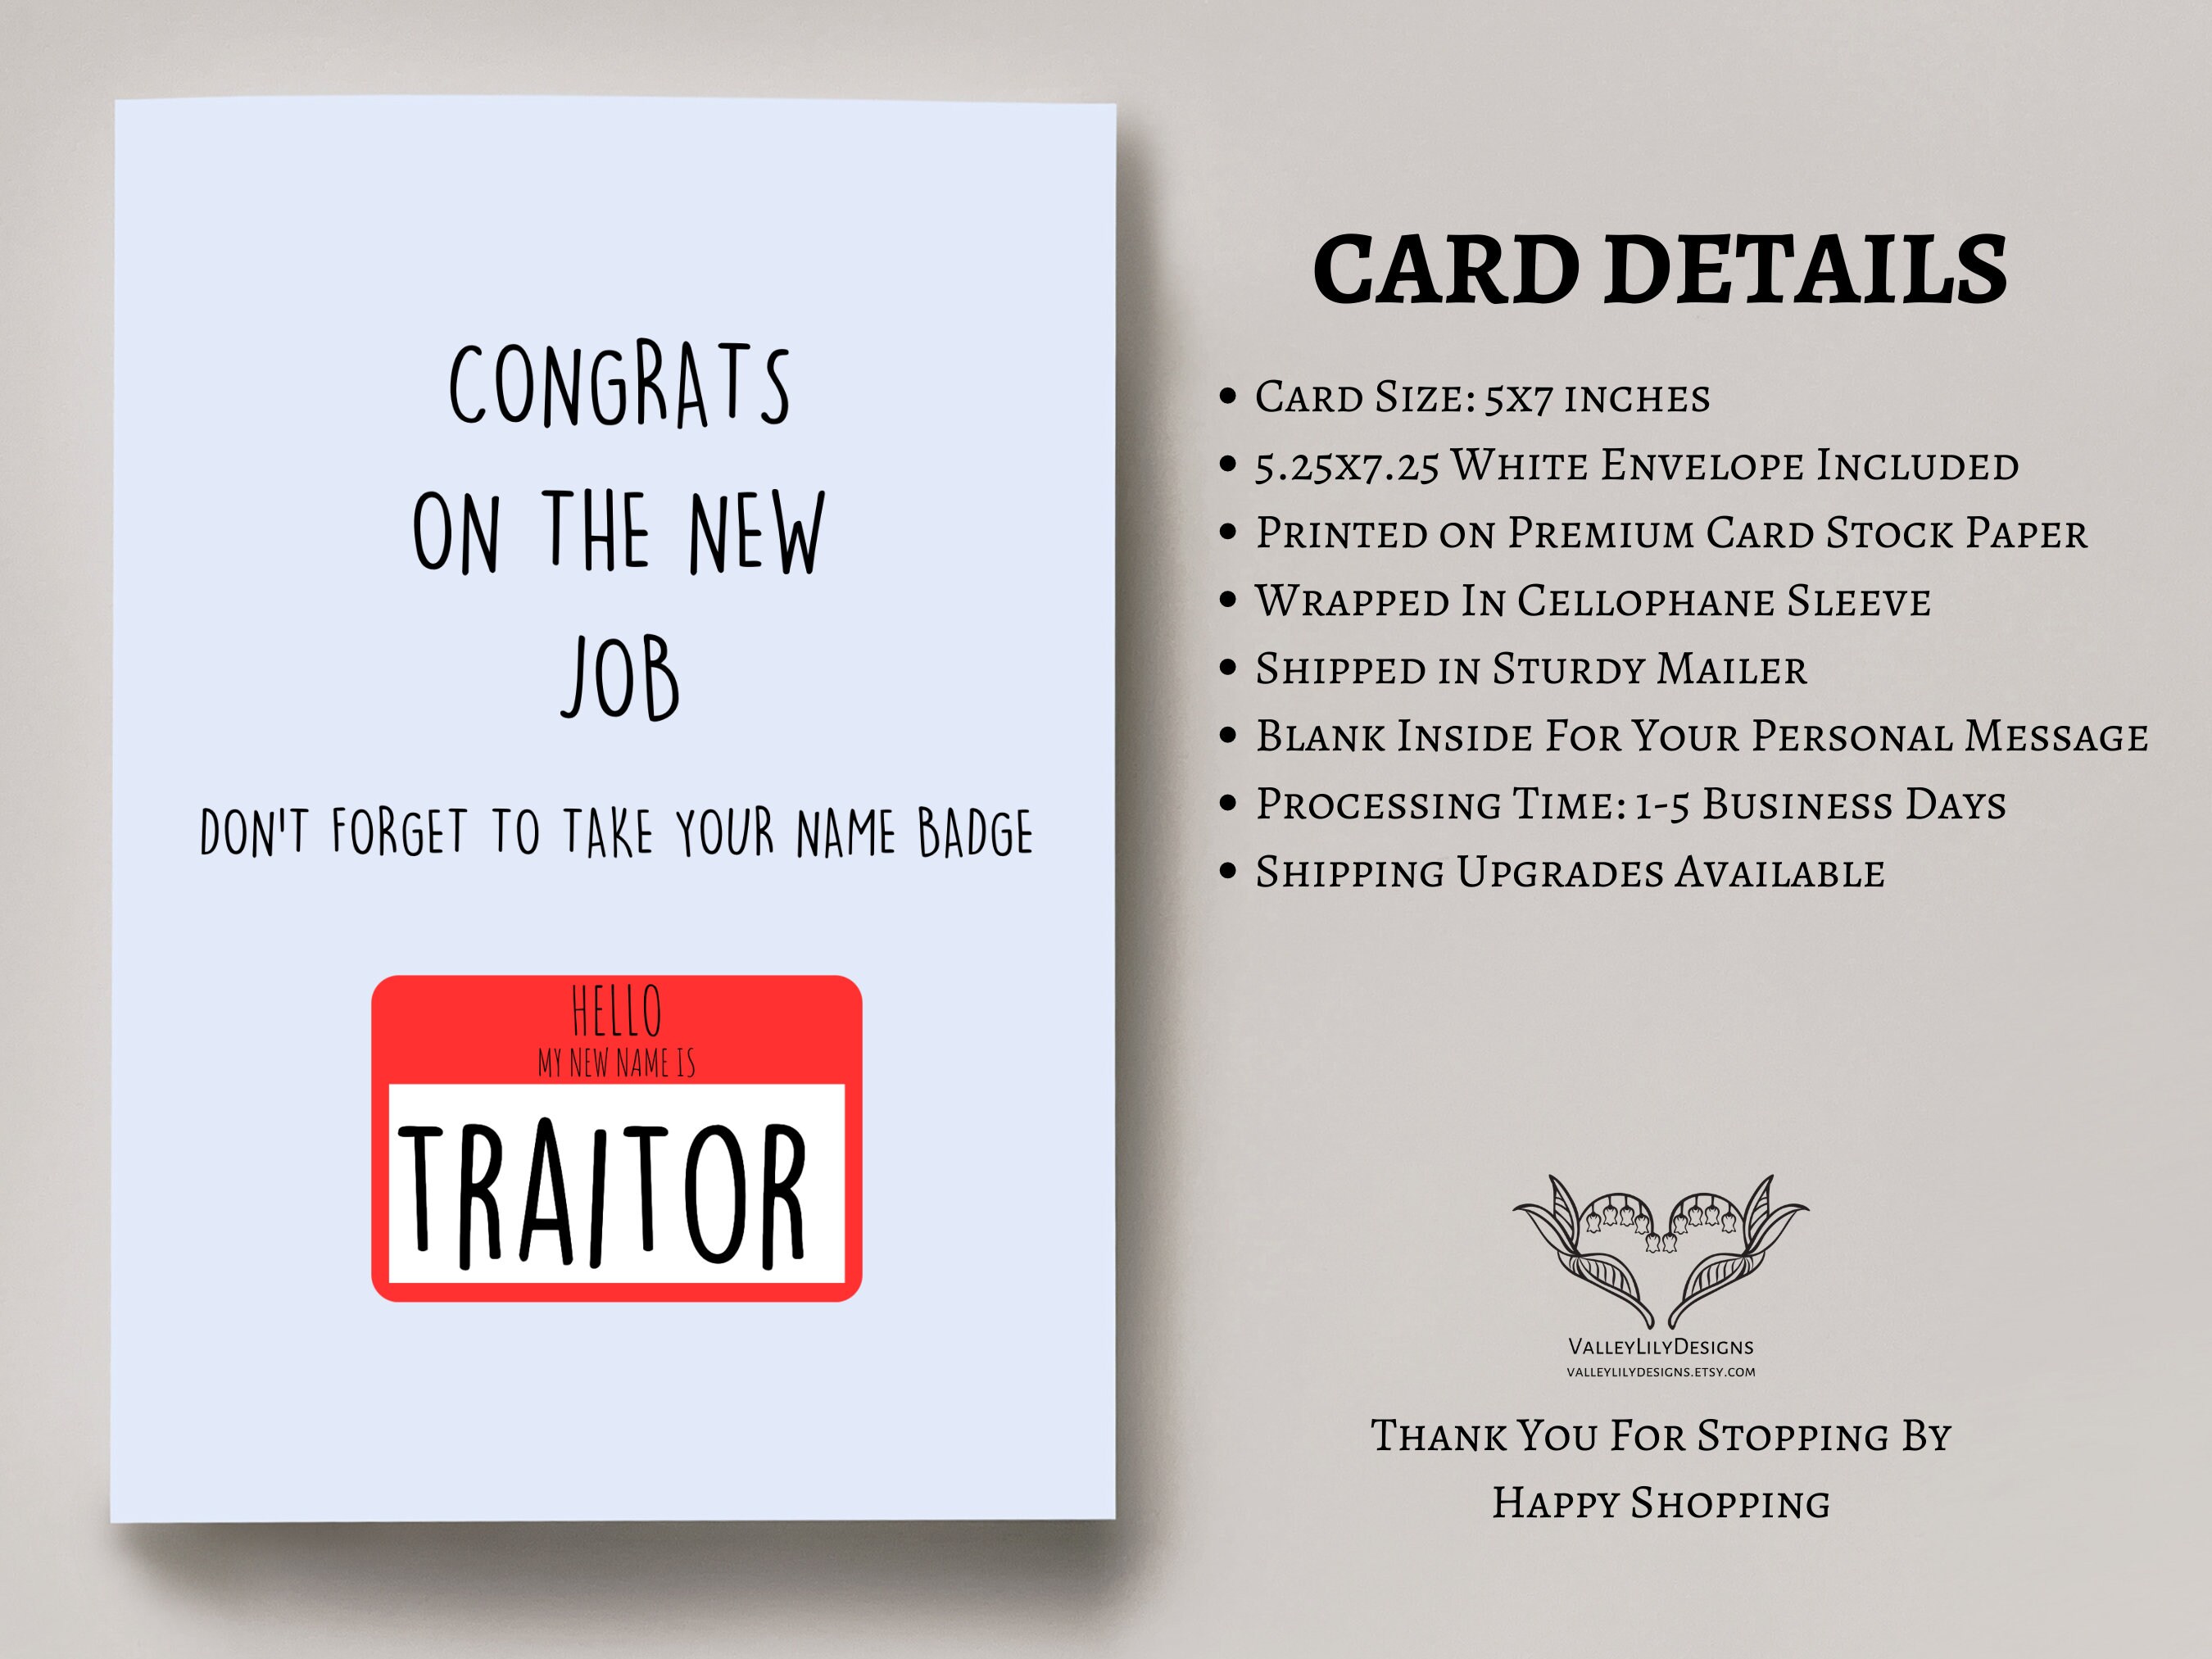 Traitor Definition Card - Humorous Coworker Leaving Card - New Job Card -  Naughty Card For Him Her - Card For Coworker